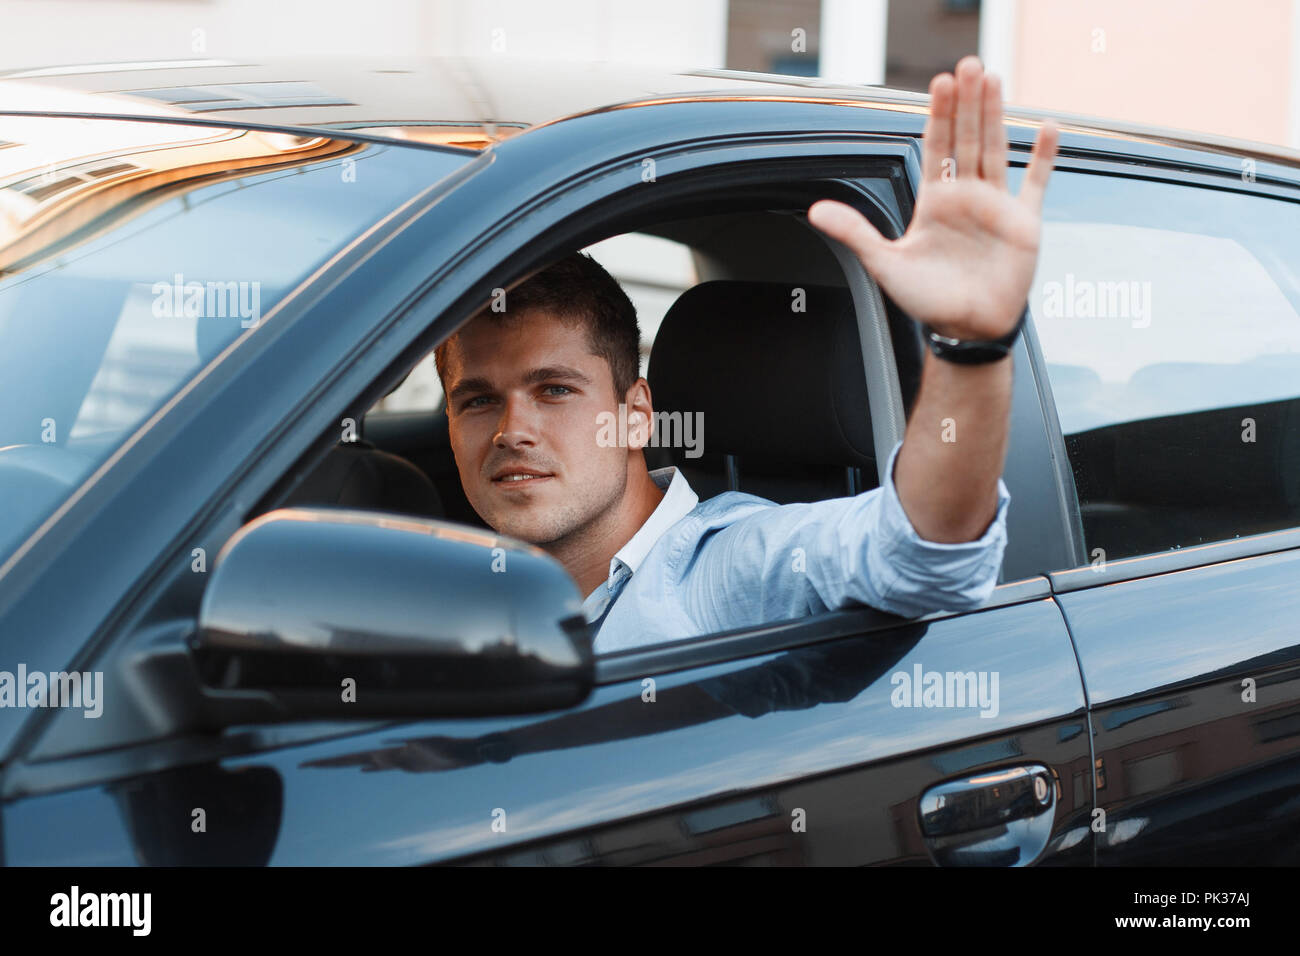 A young man in a car stuck his hand out the window. Man approves Stock Photo